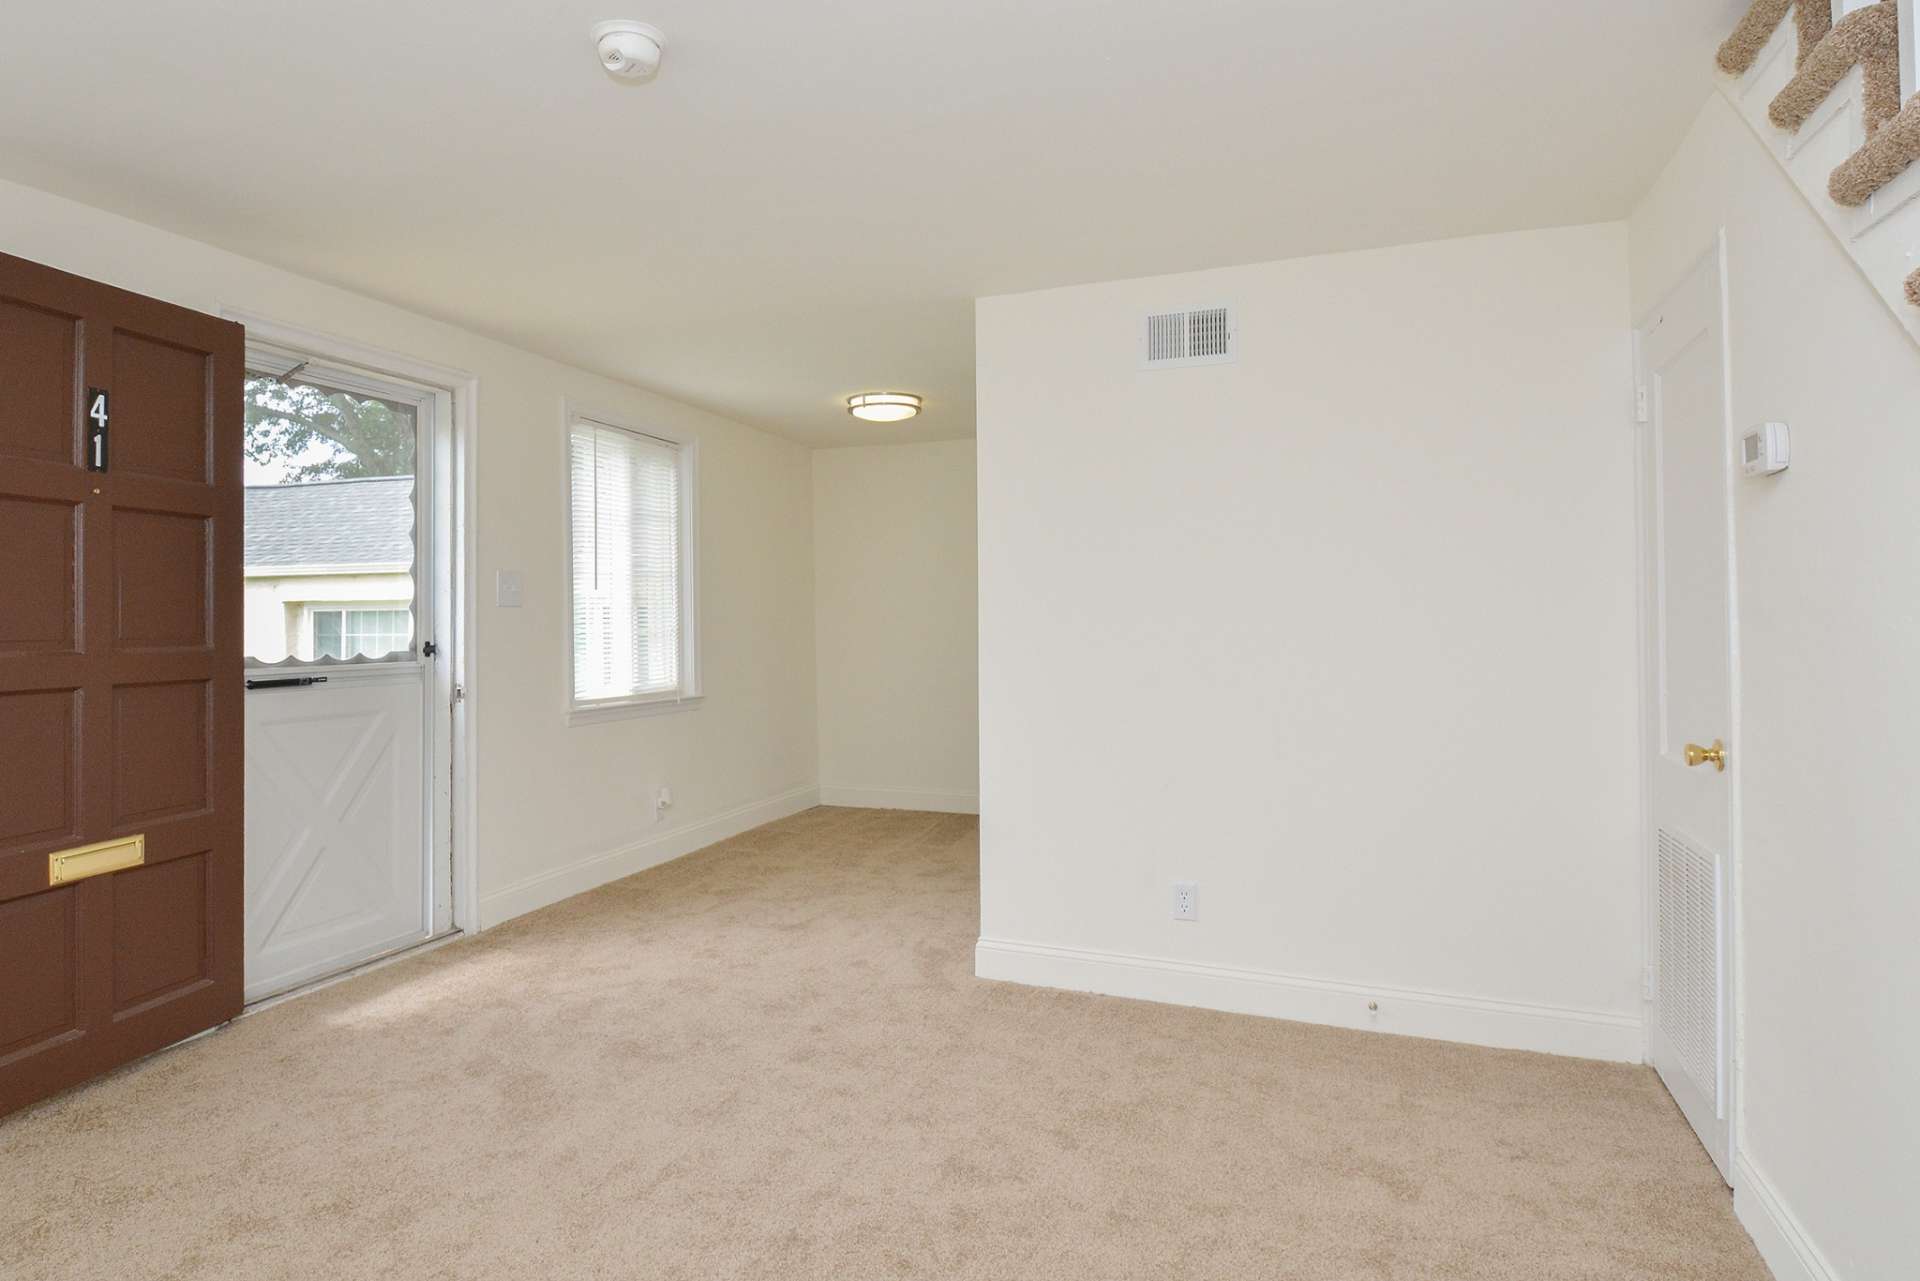 Downstairs of a townhome with large windows and carpeted flooring.